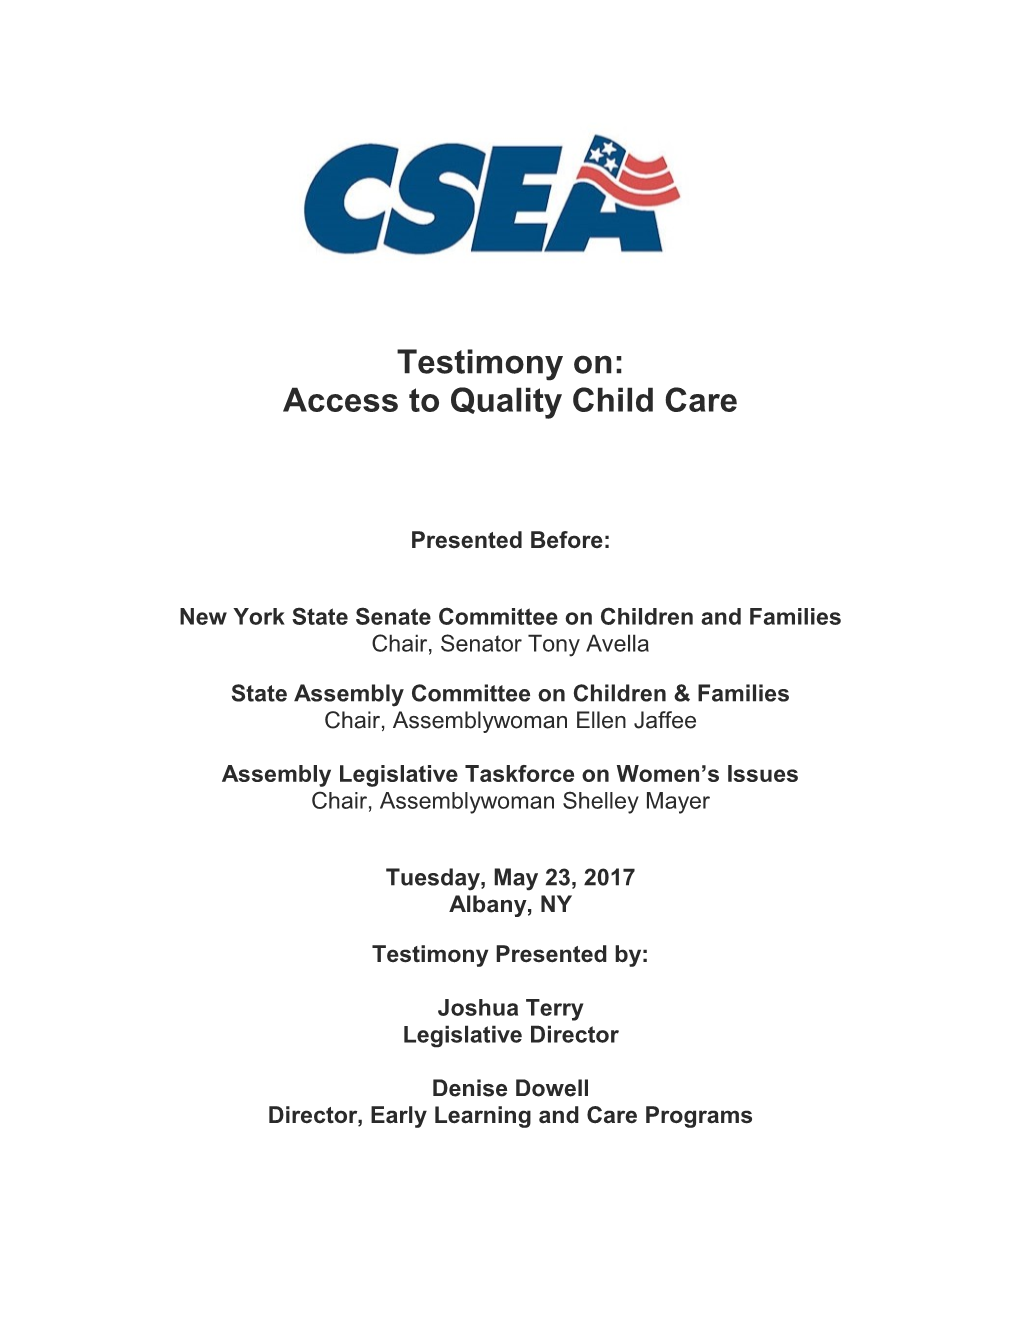 Access to Quality Child Care